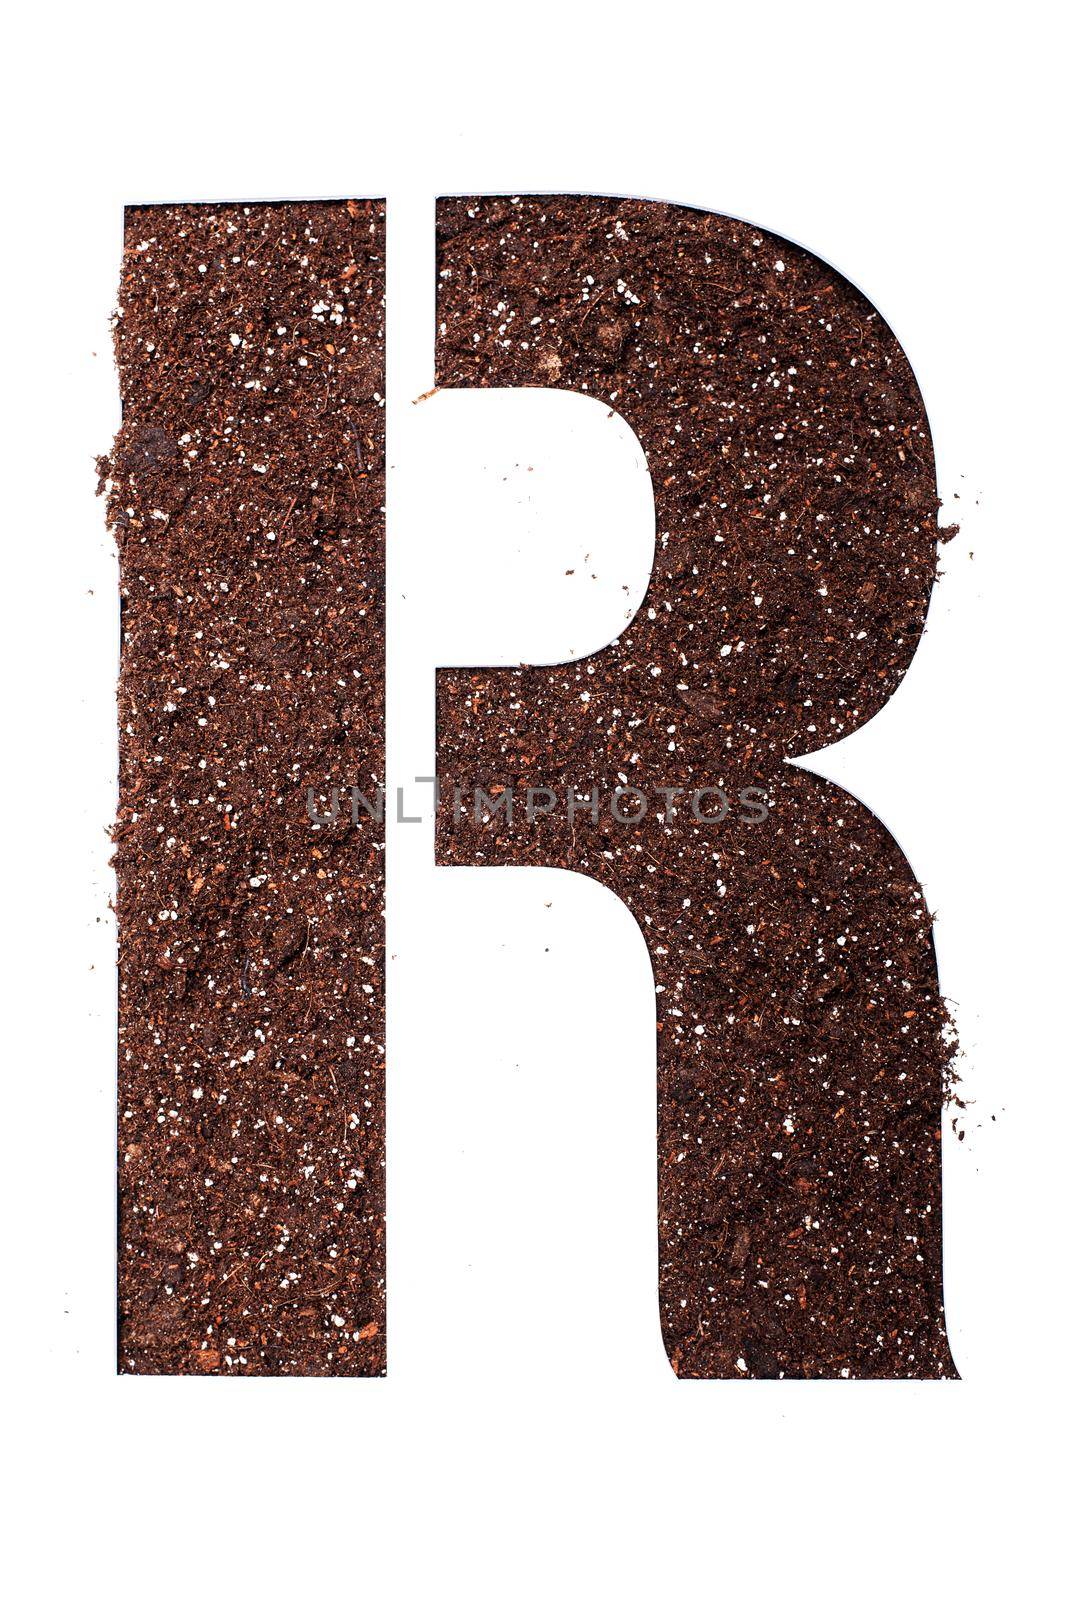 stencil letter R made above dirt on white surface by kokimk